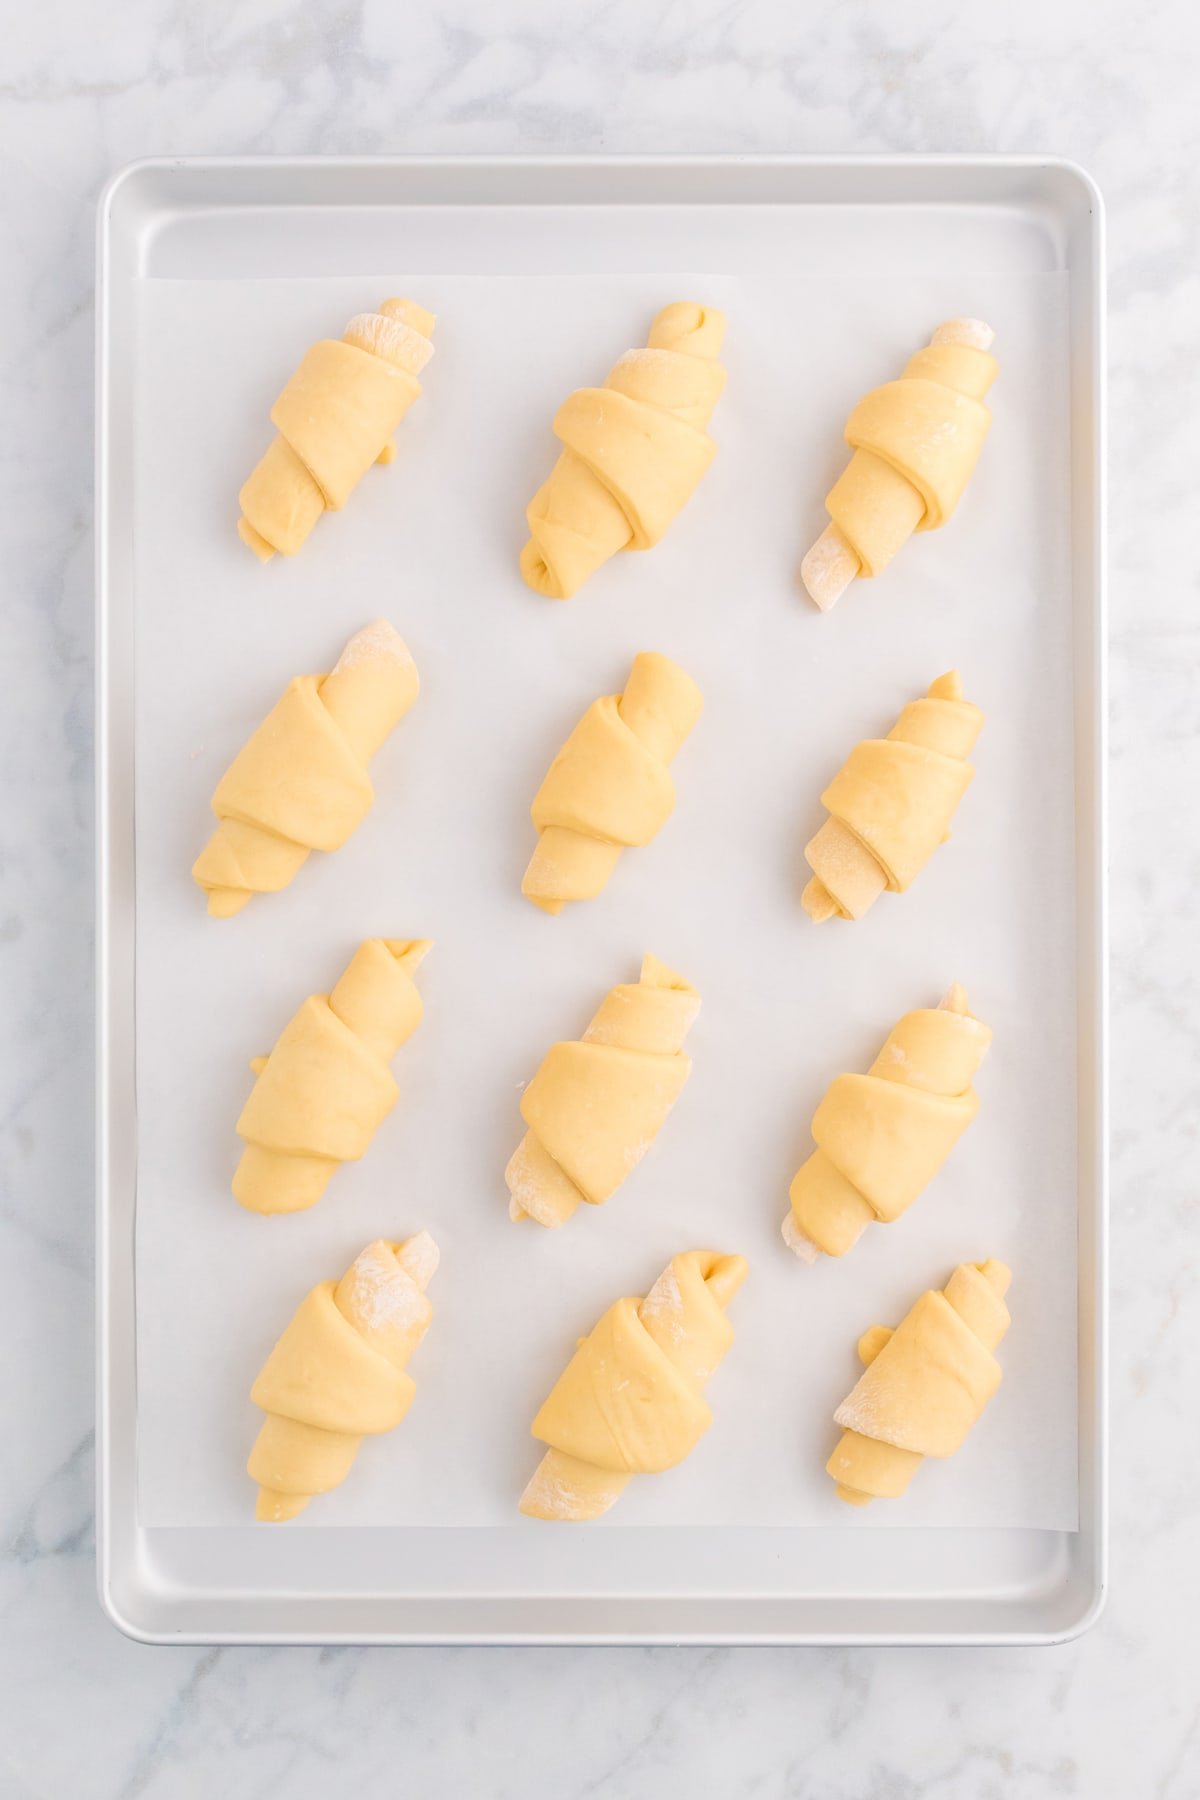 Unbaked crescent rolls on a baking sheet